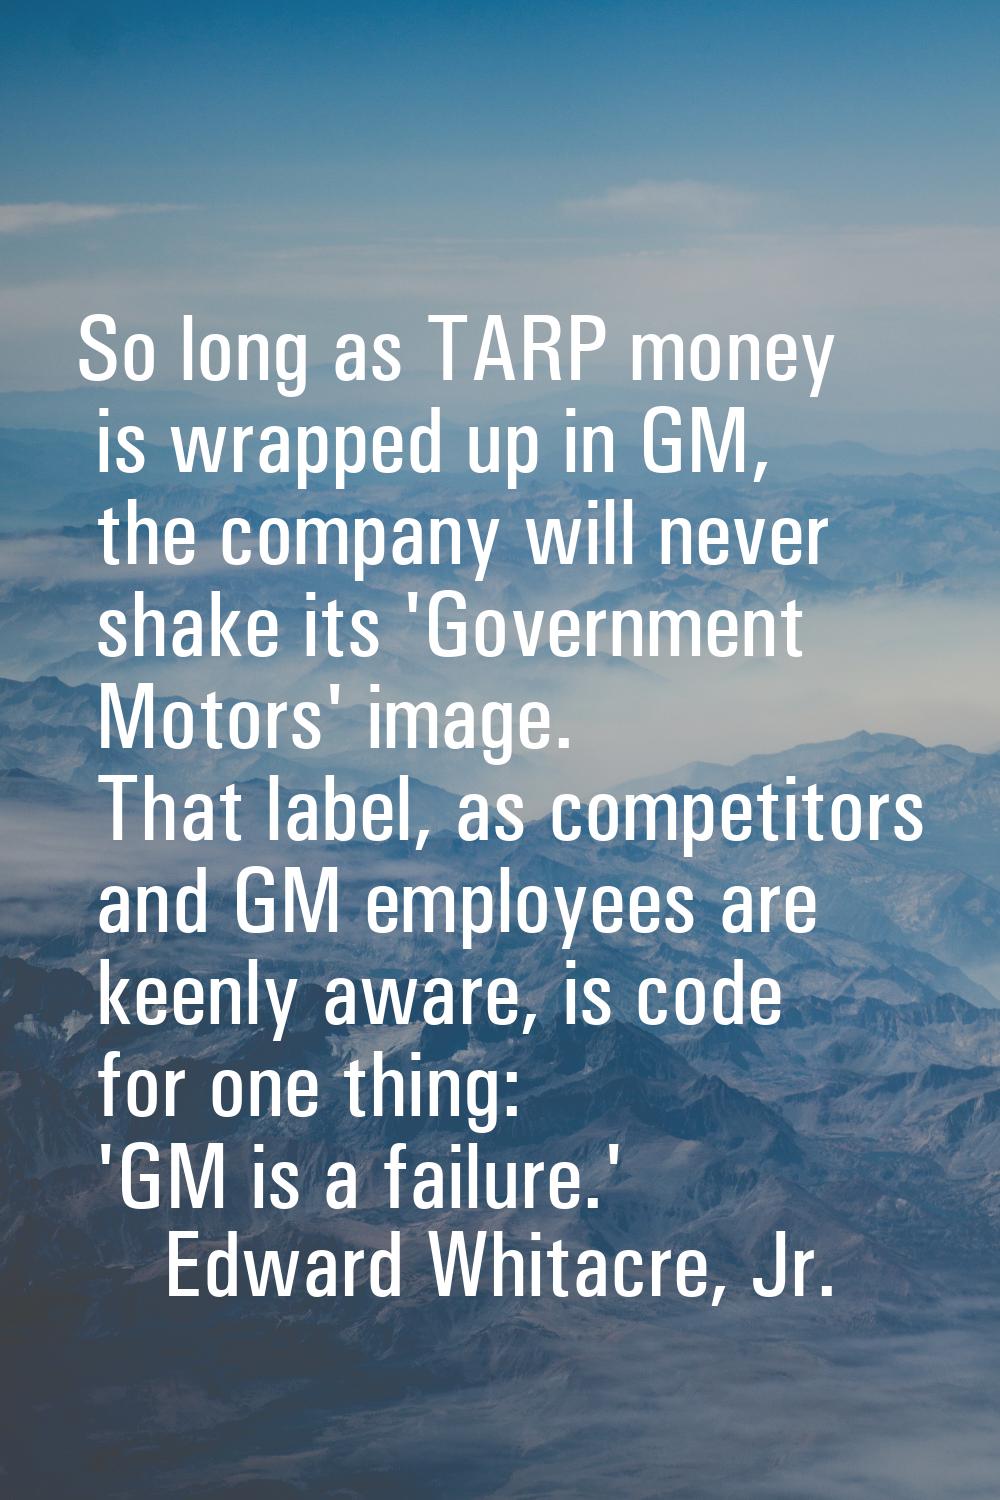 So long as TARP money is wrapped up in GM, the company will never shake its 'Government Motors' ima